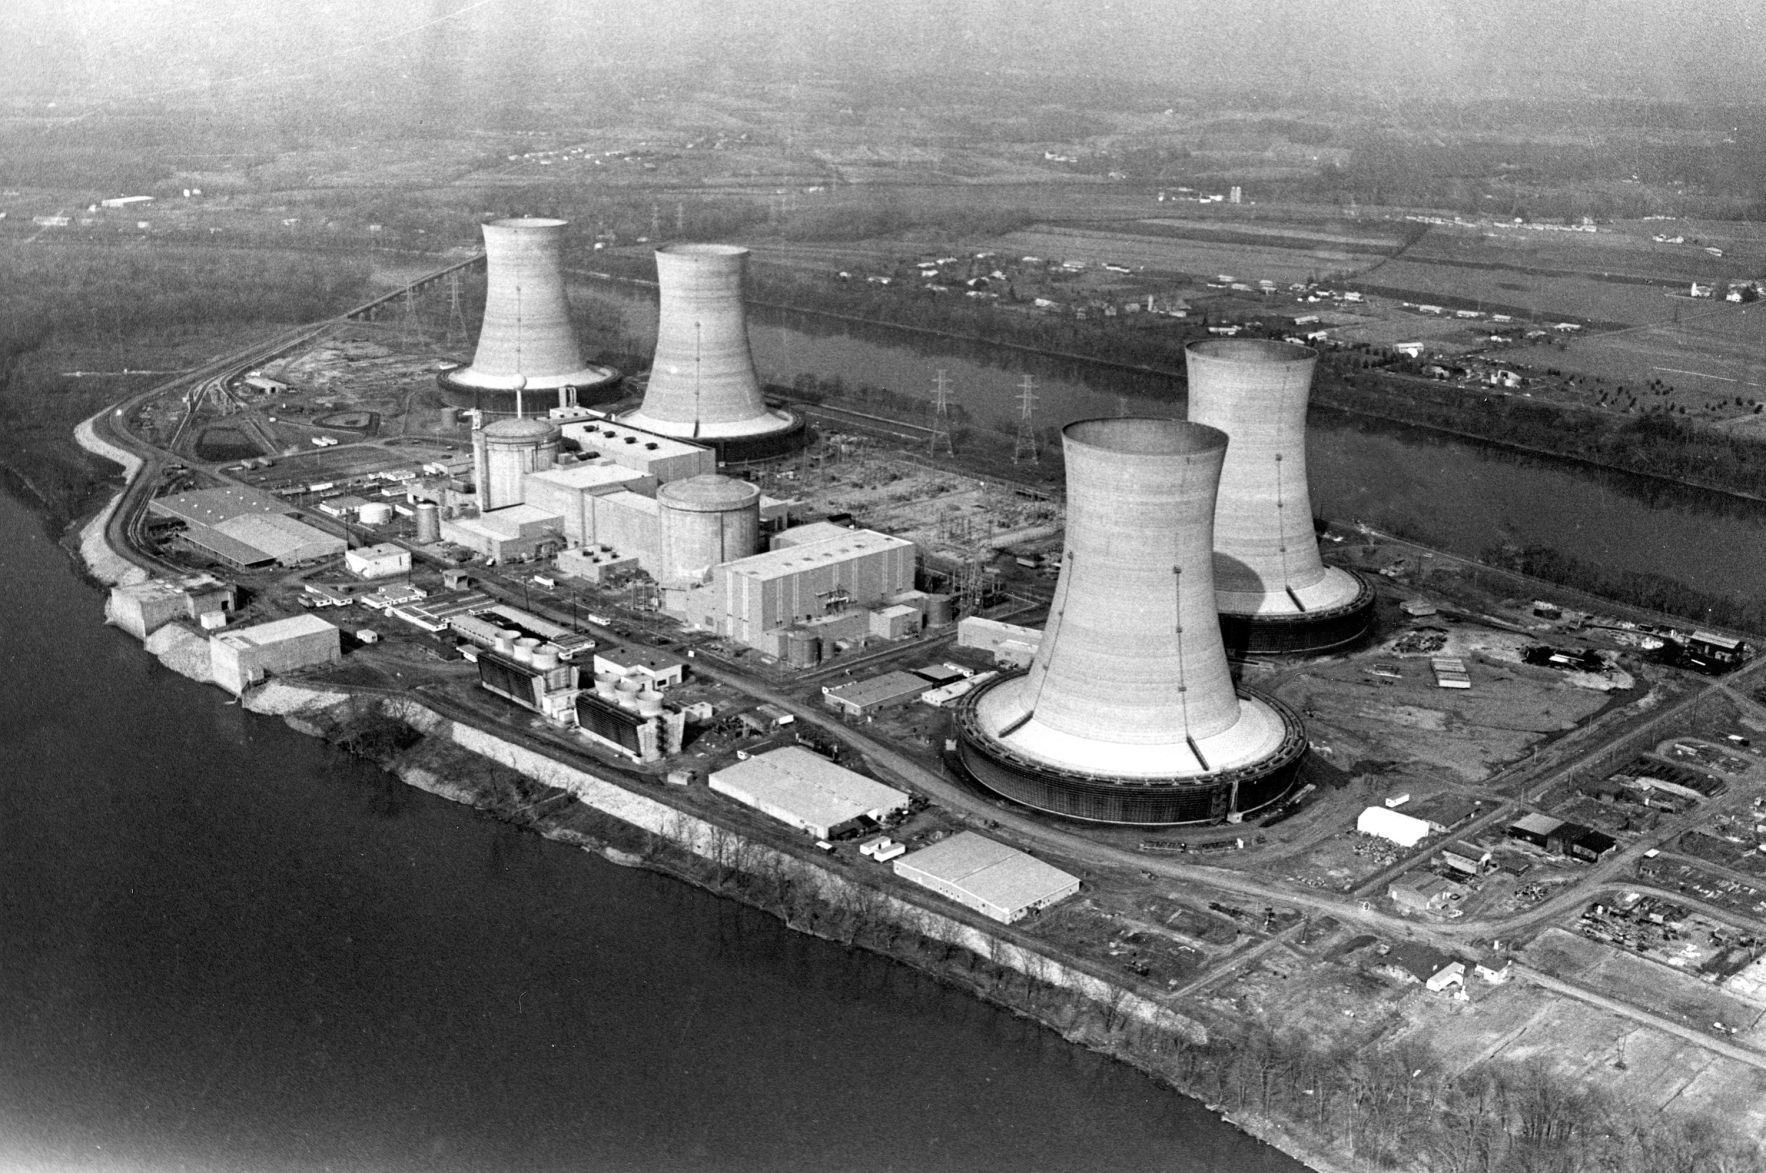 AP WAS THERE: Three Mile Island nuclear power plant accident